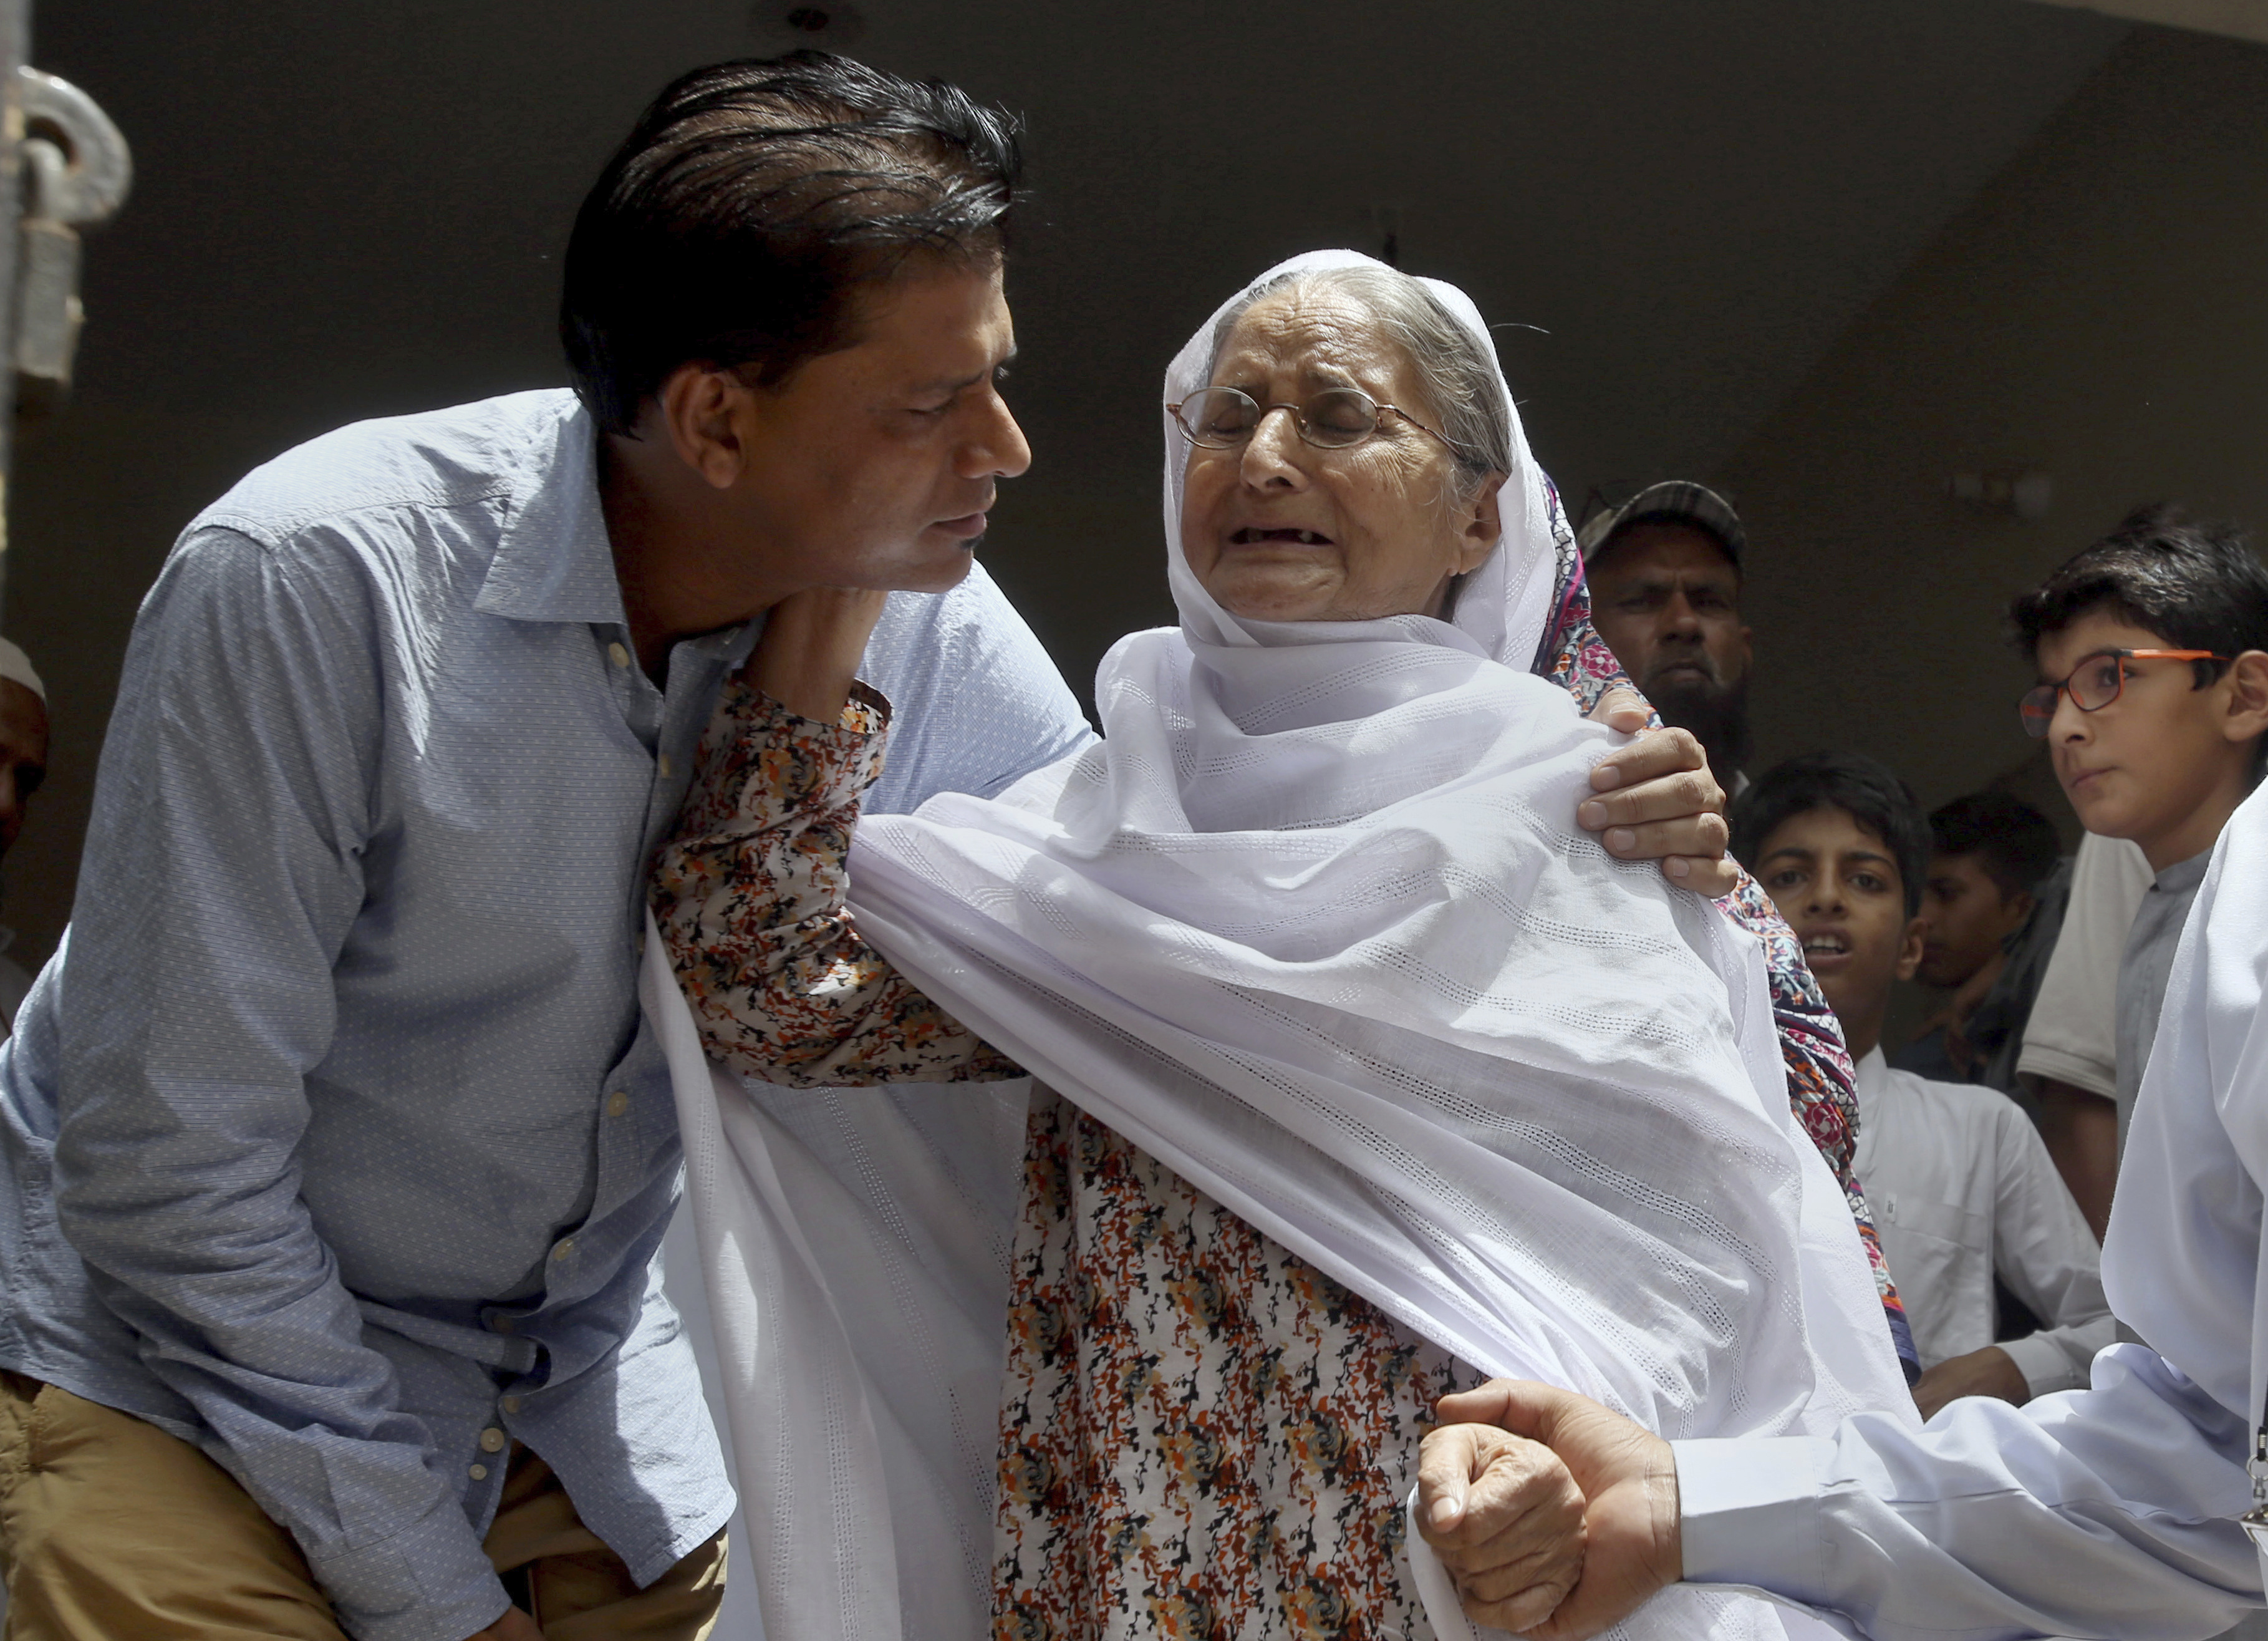 Abdul Aziz Sheikh comforts an elderly woman upon the news his daughter has died in a US school shooting (Fareed Khan/AP)